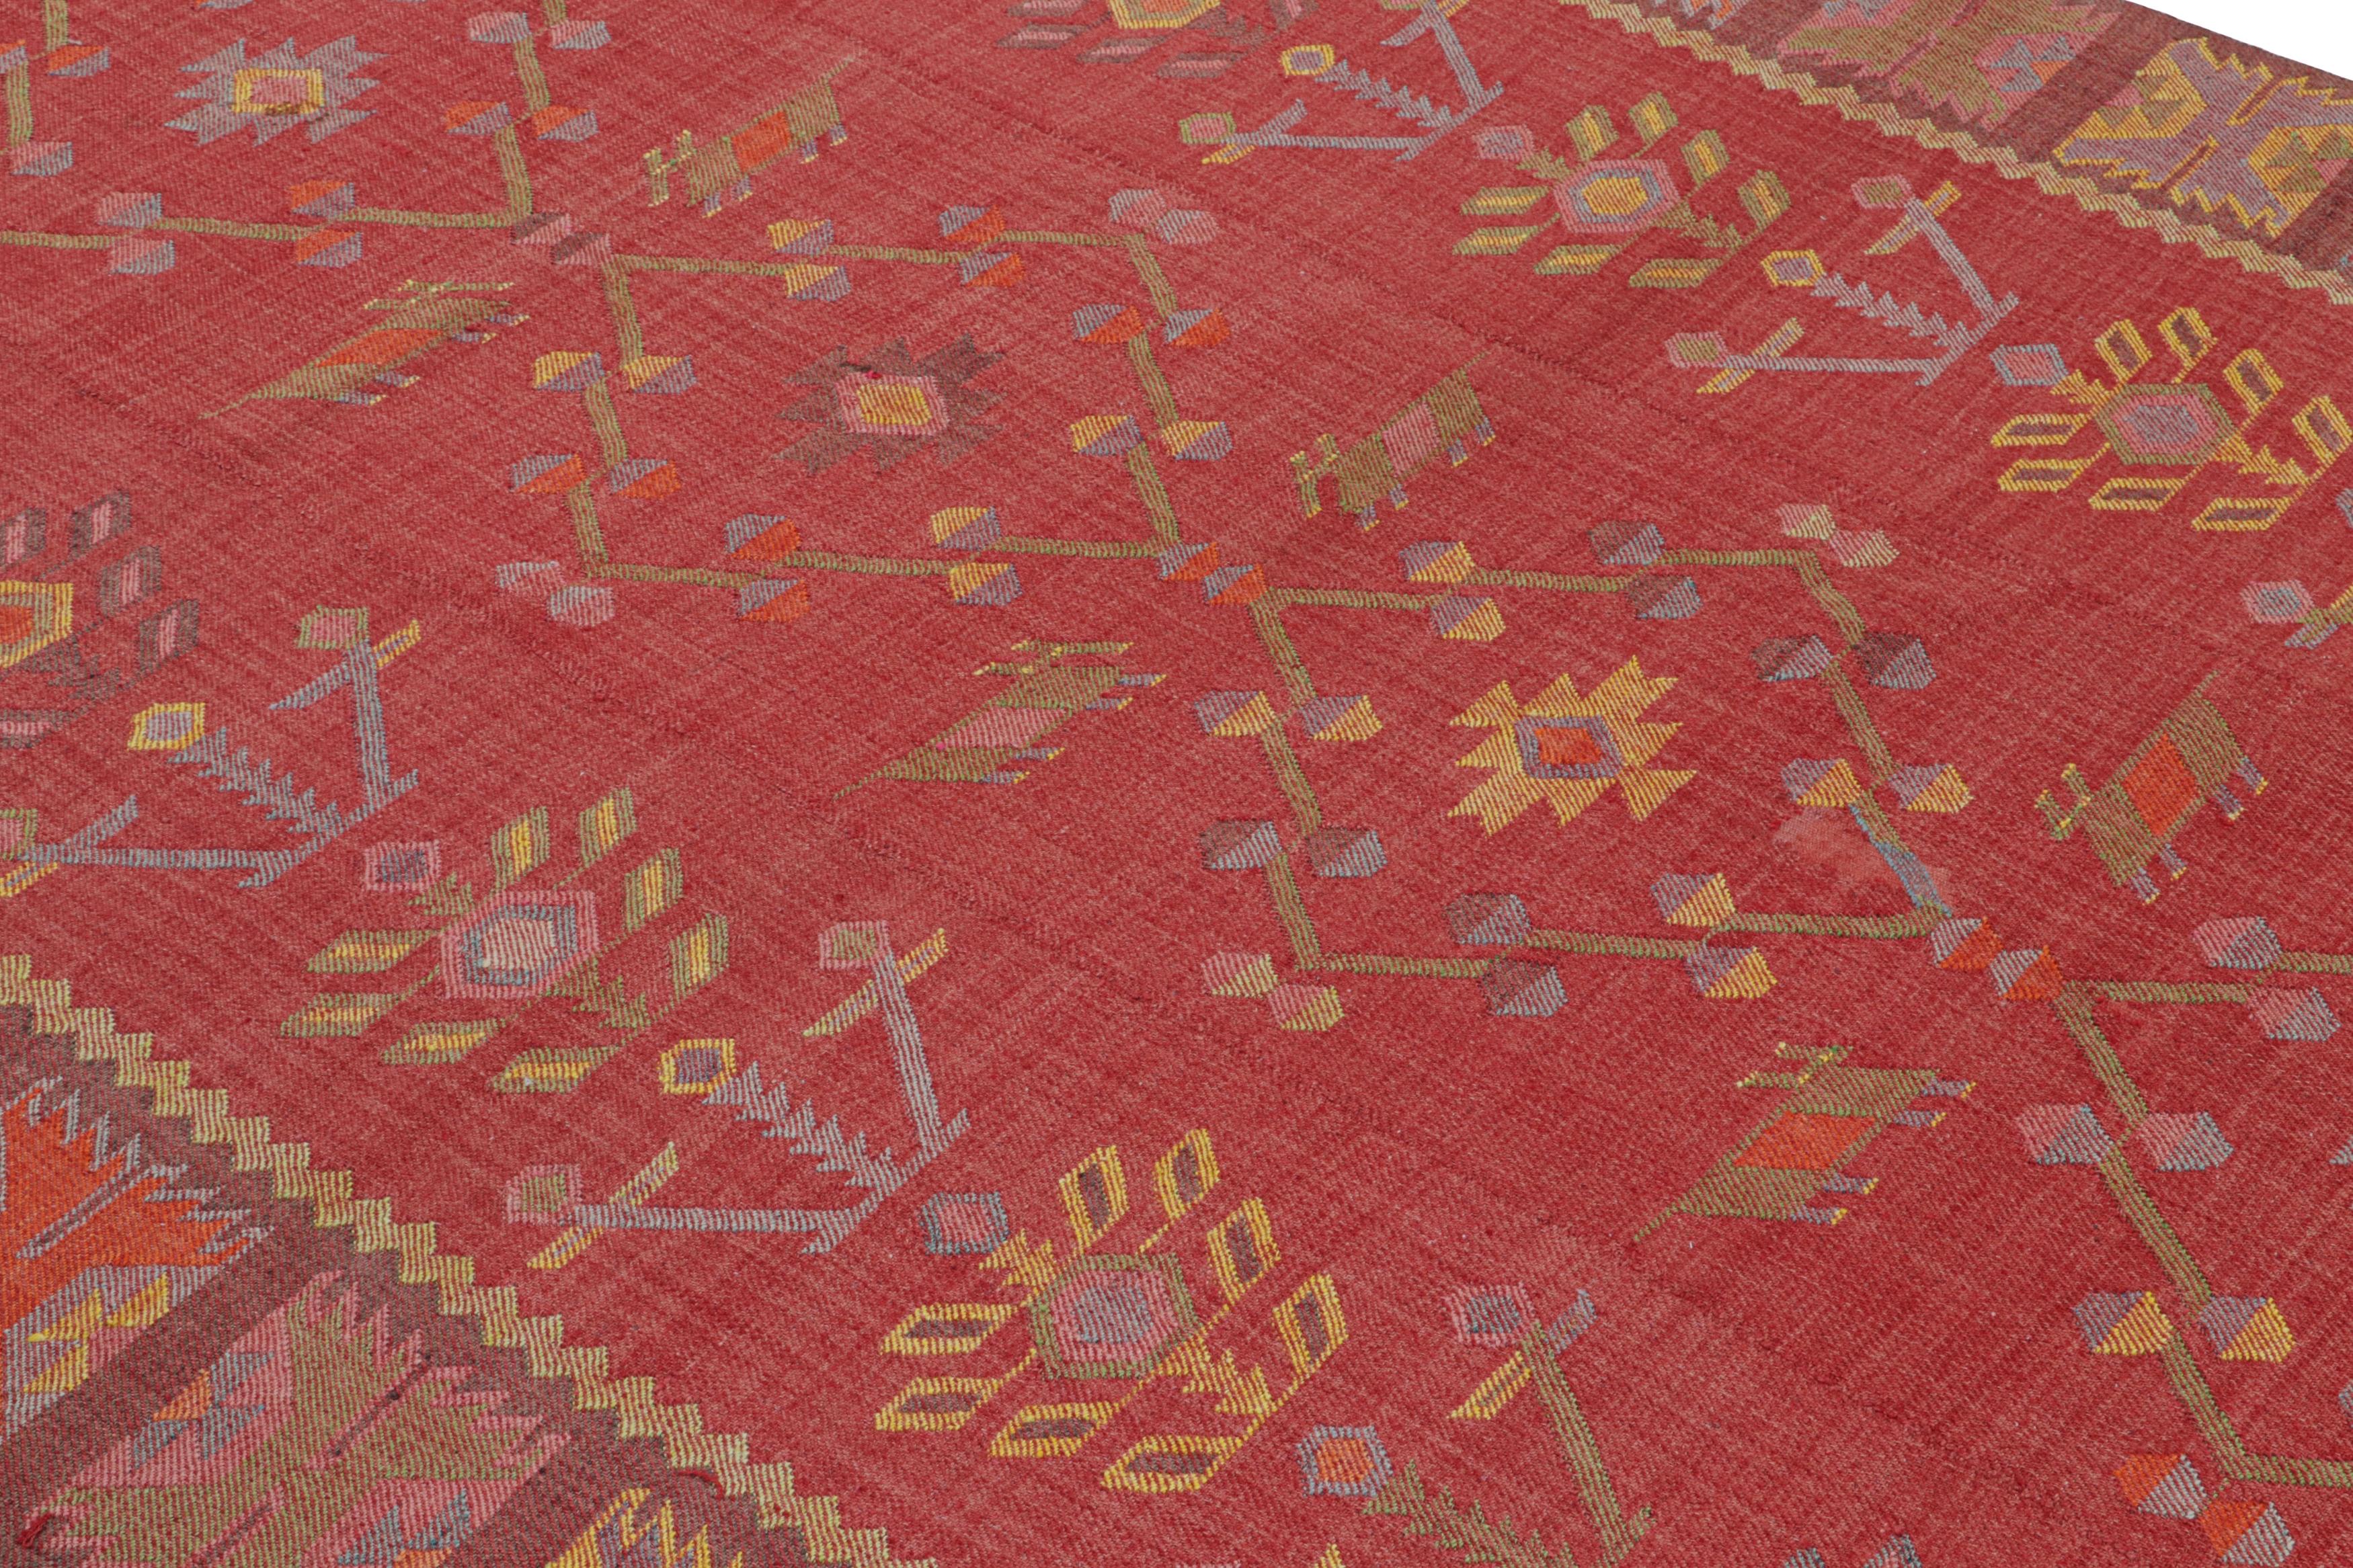 Handwoven in a wool flat-weave originating from Turkey circa 1950-1960, this vintage Kilim rug connotes a midcentury Kilim origin in very discerning, warm shades of raspberry and coral red complementing the foreground play of golden-yellow and blue.